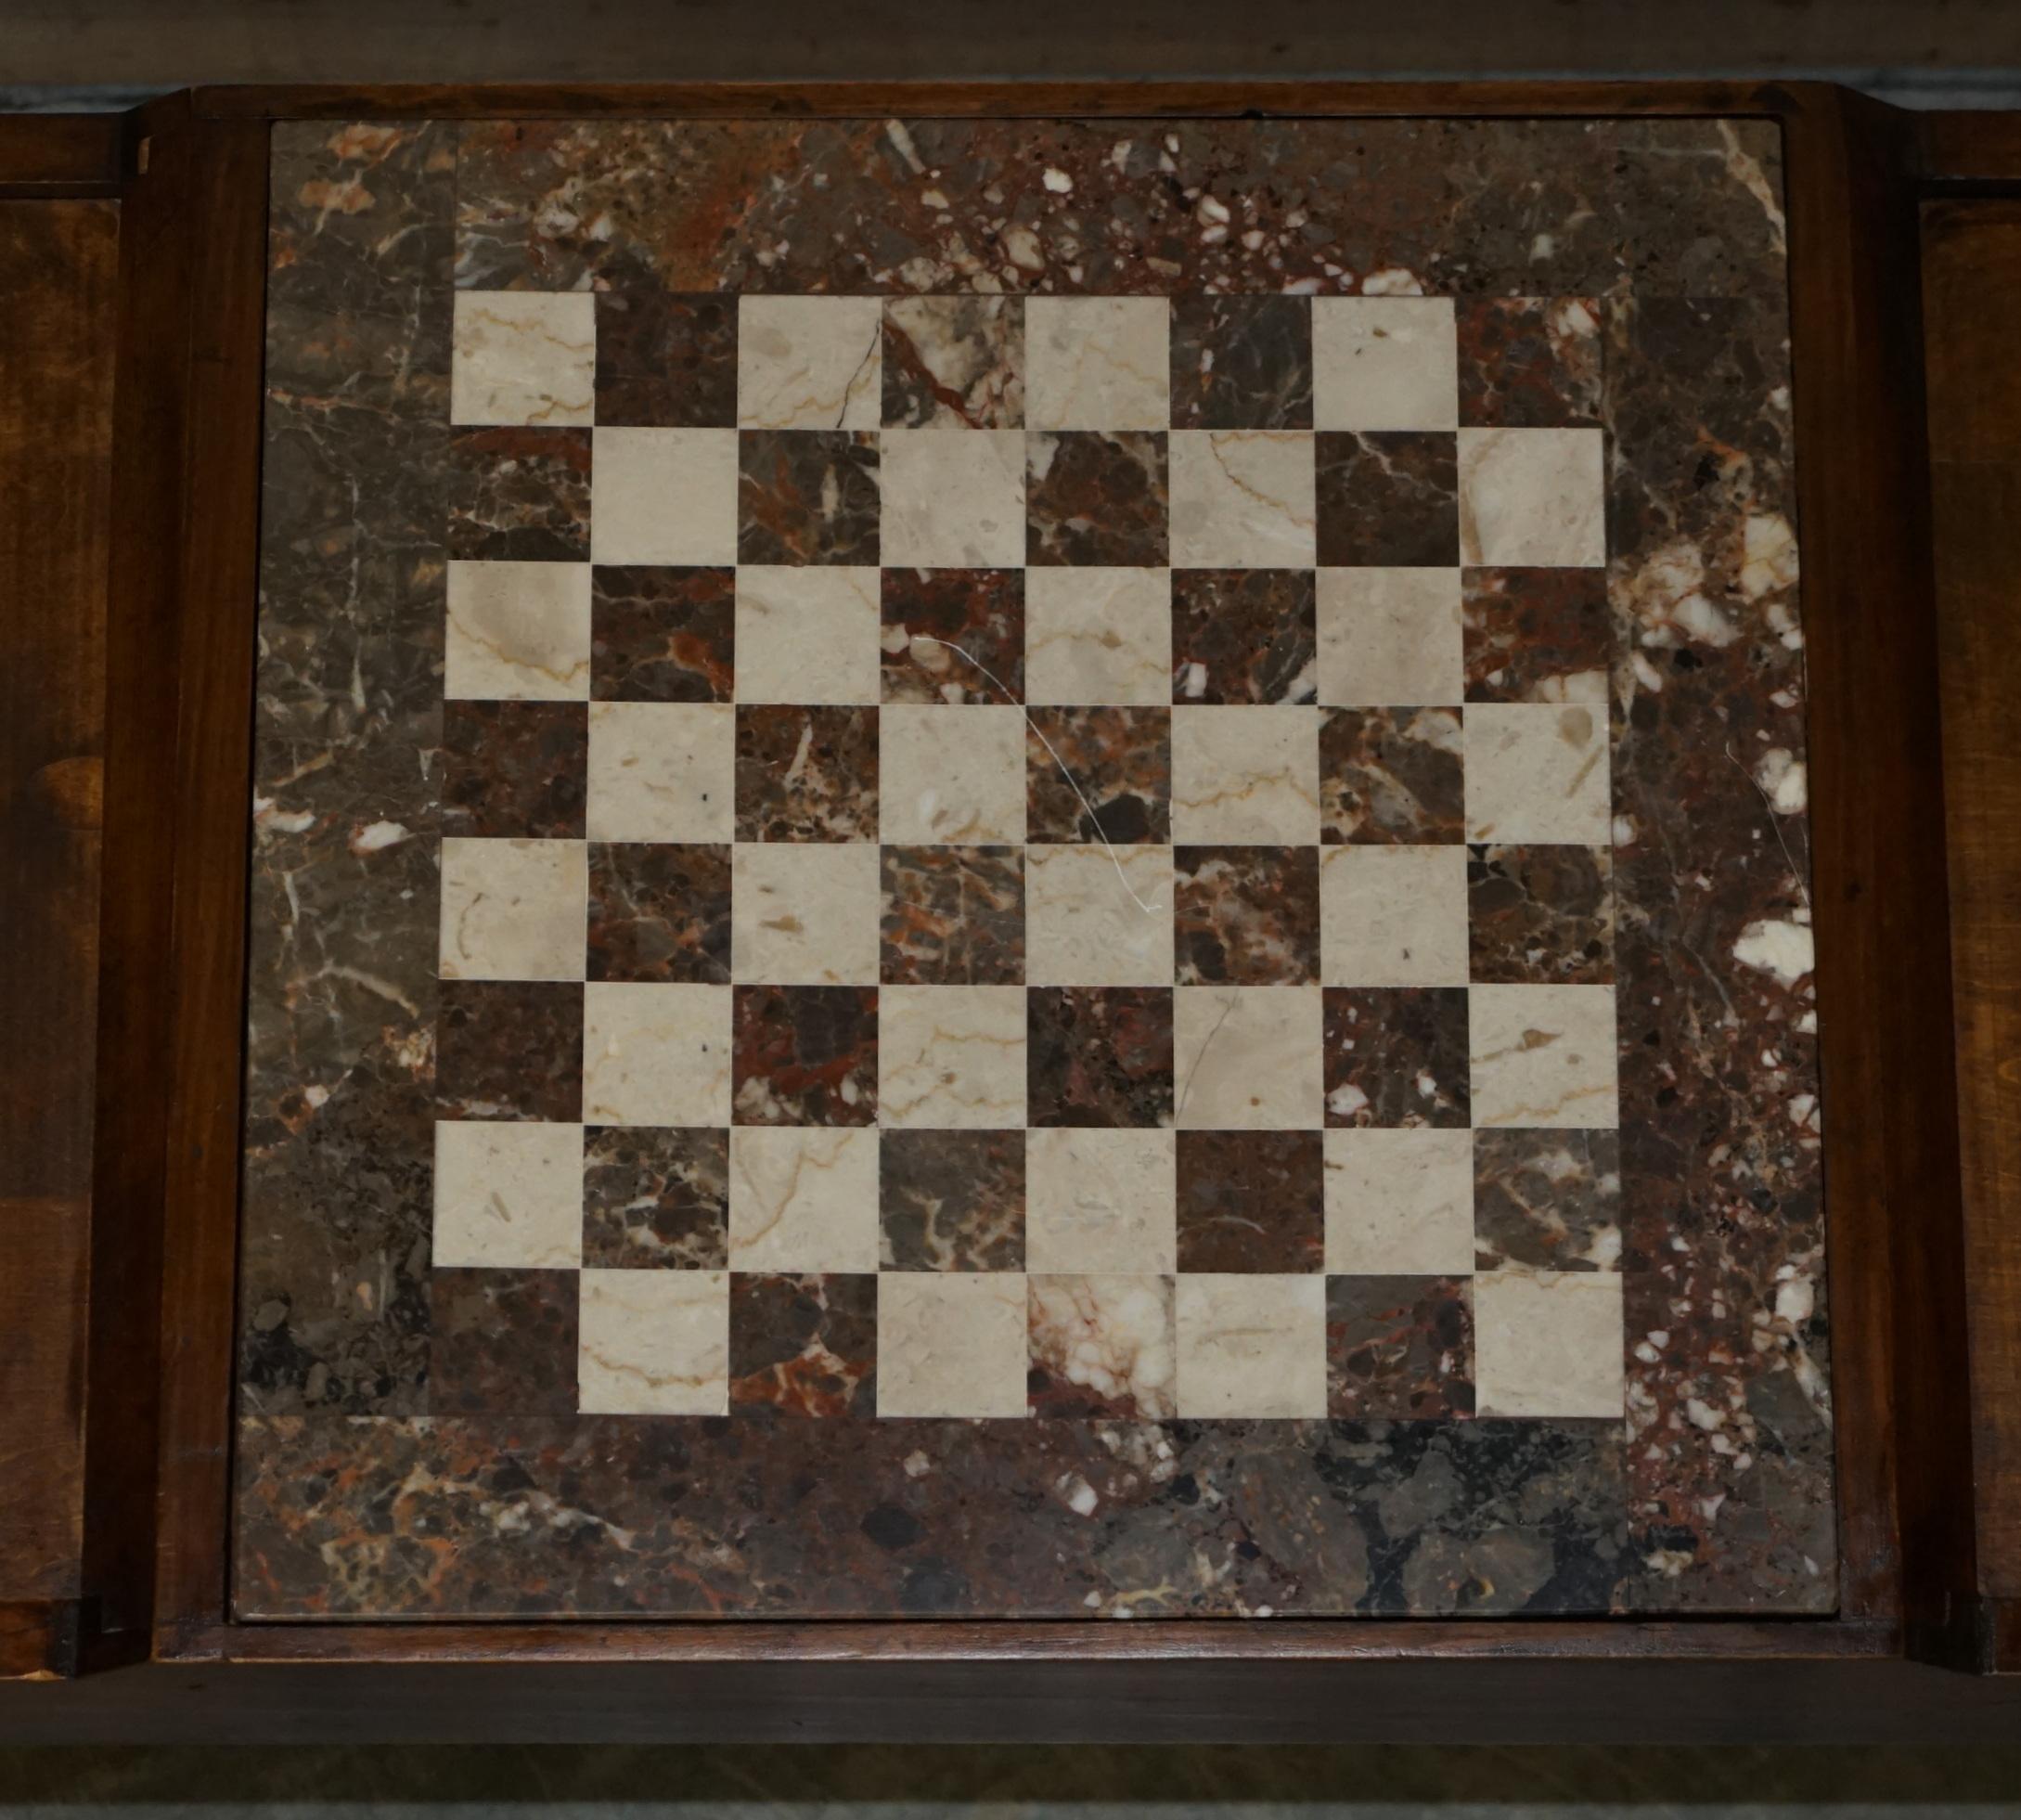 Vintage Chessboard Coffee Table with Marble Board and ebonized Chess Set Pieces 4